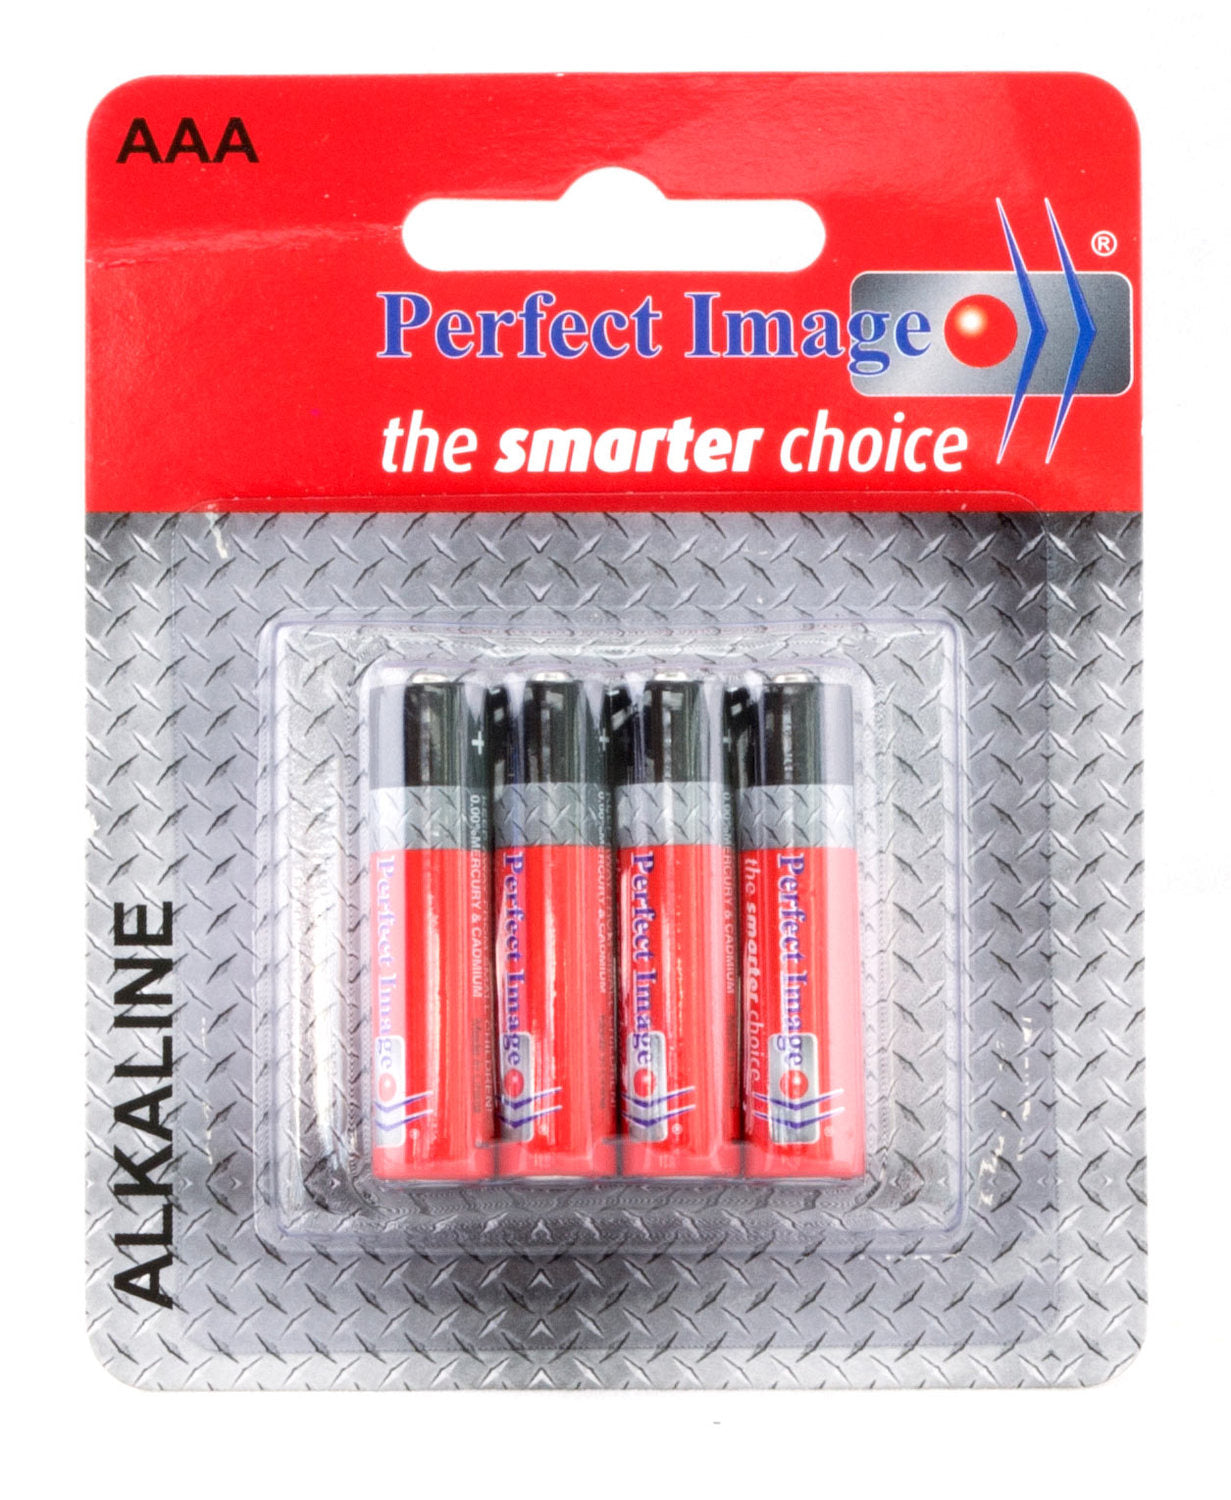 PERFECT IMAGE Perfect Image Batteries - AAA, AA, C, D sizes